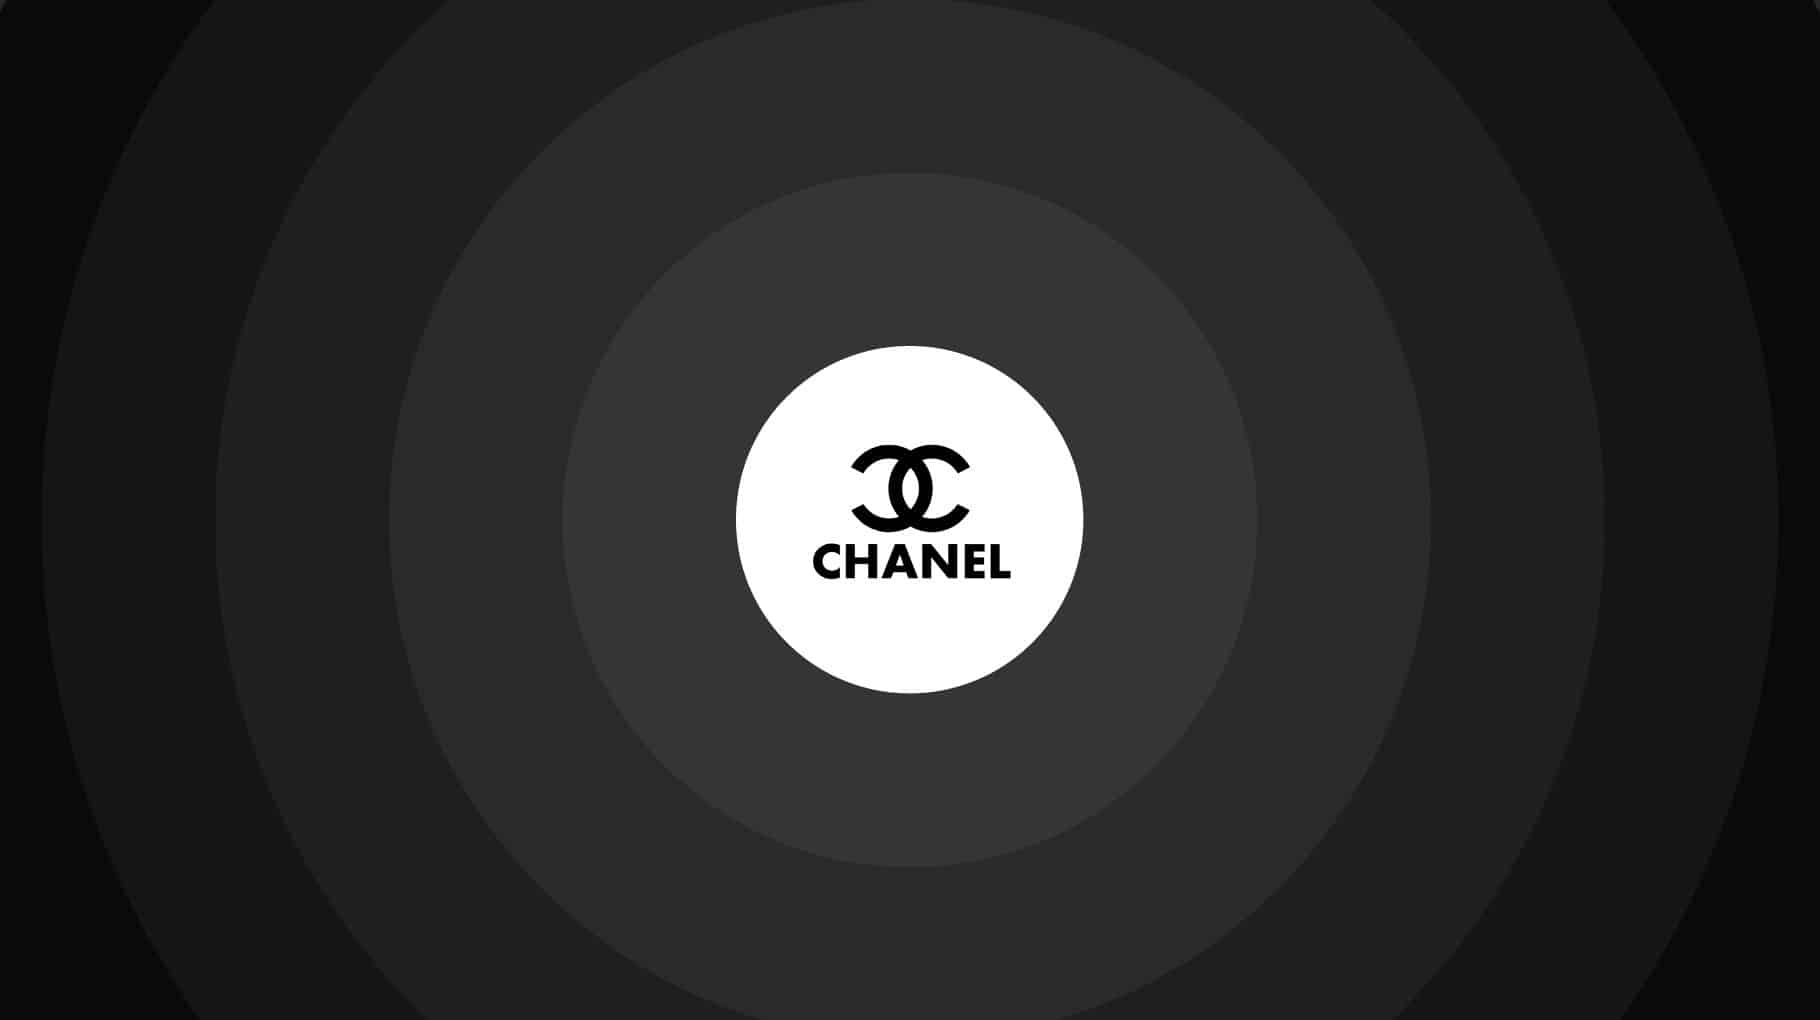 Chanel Revenue and Growth